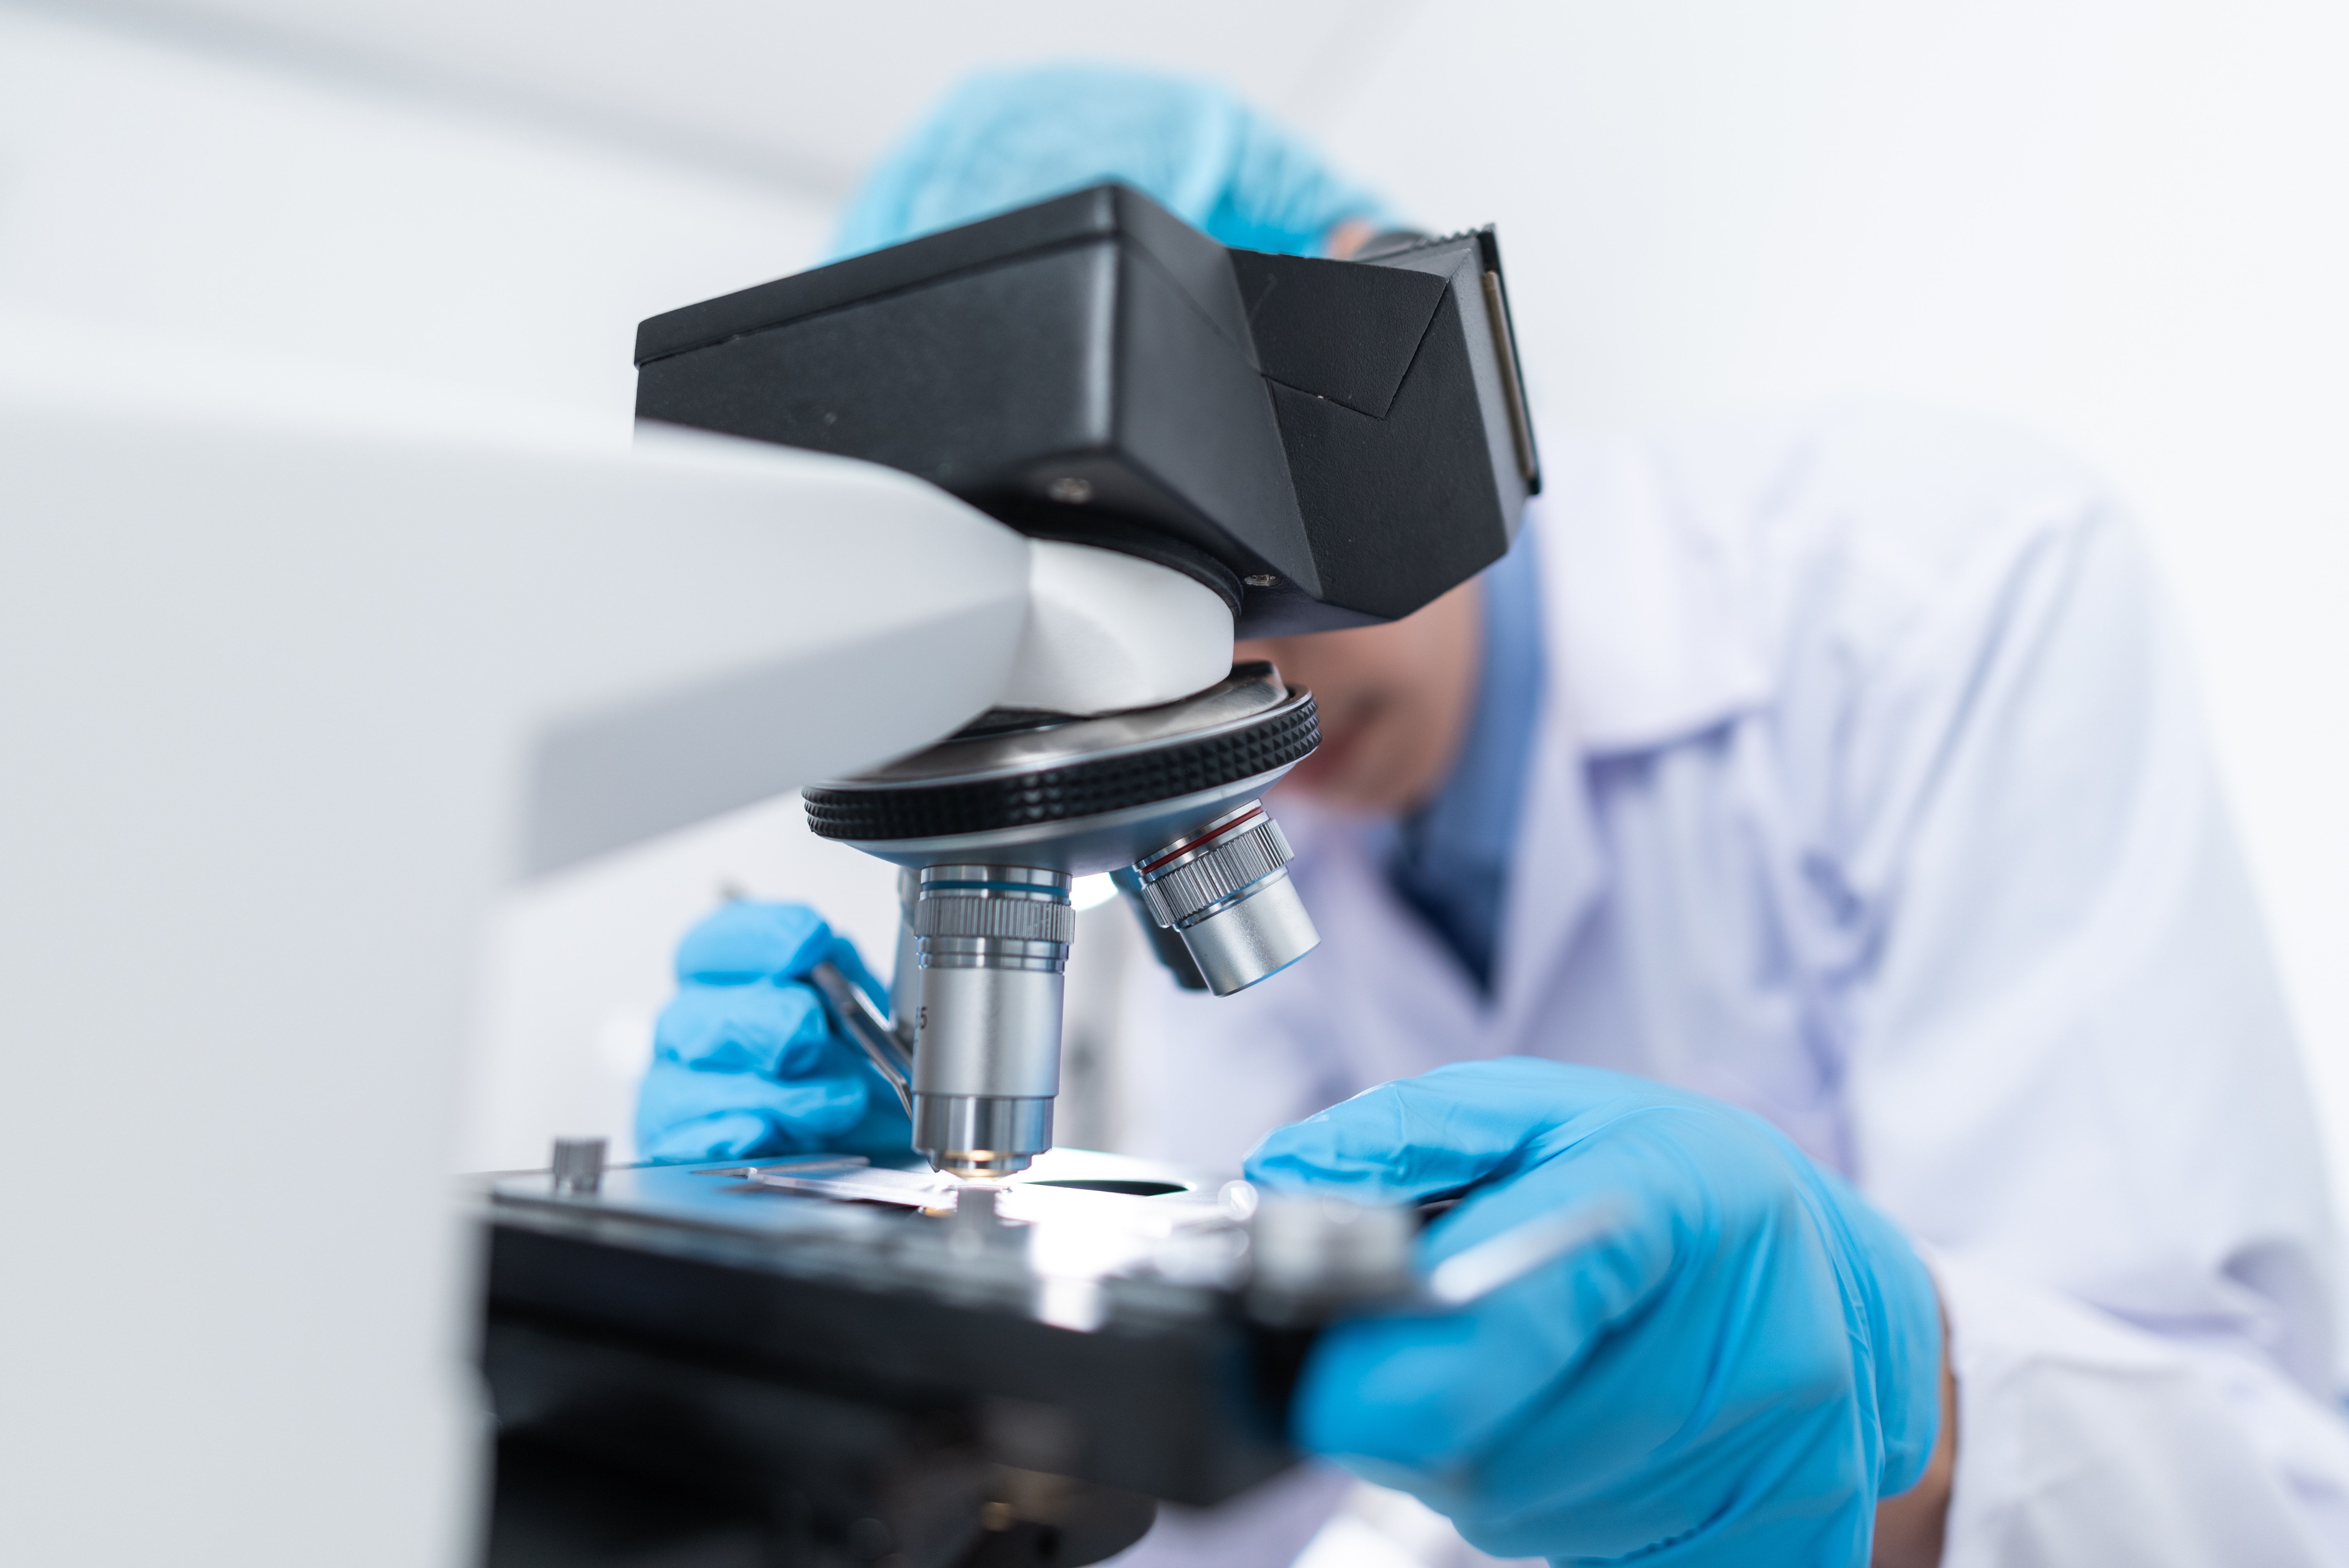 Researcher wearing gloves and cap looking into microscope